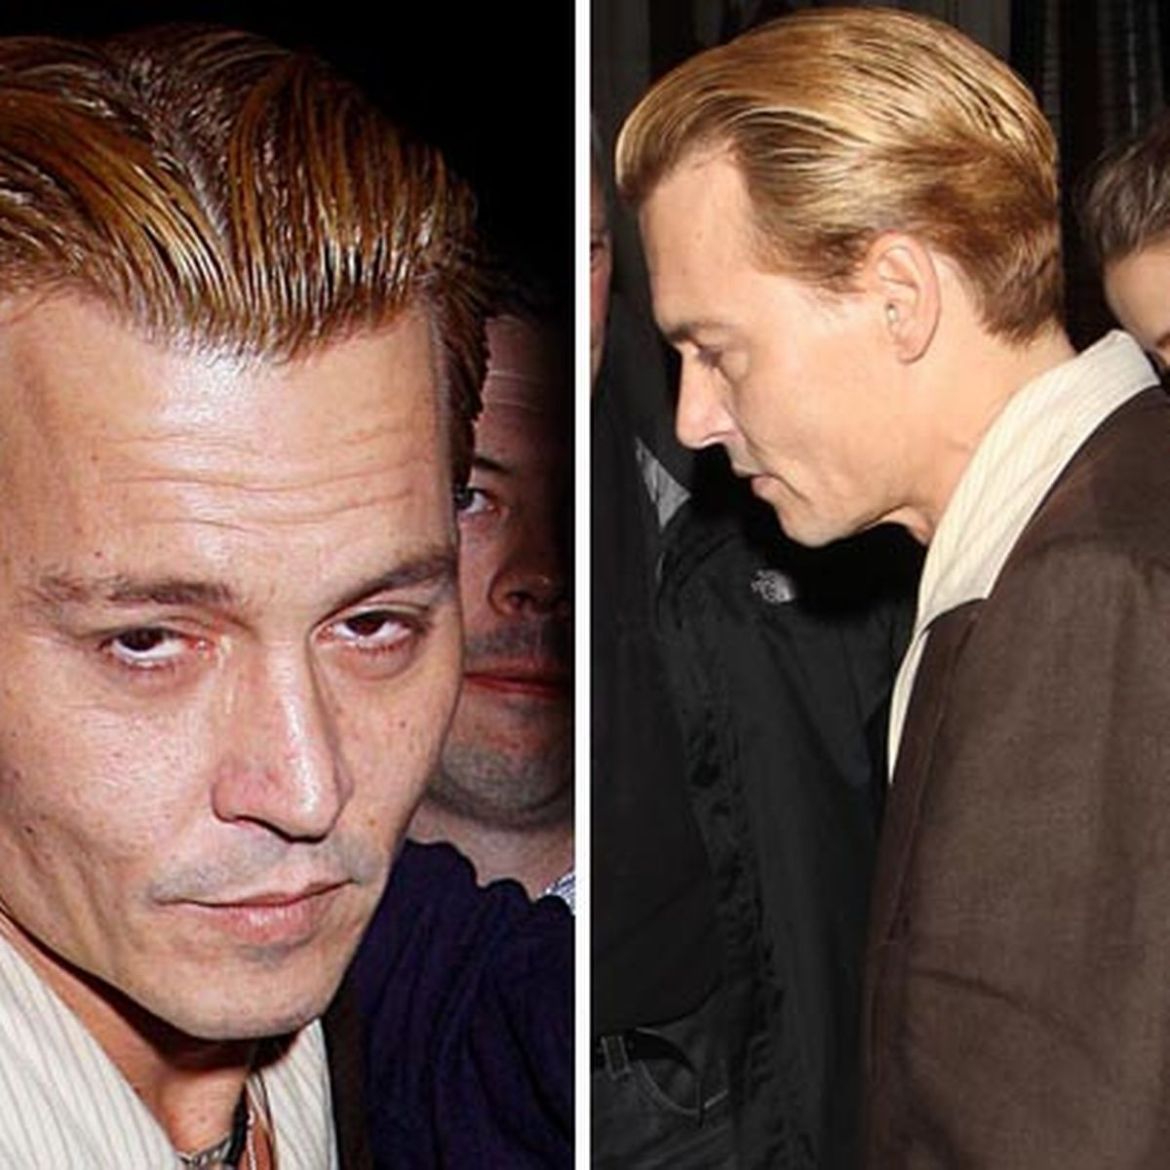 Comb over Johnny Depp hairstyle